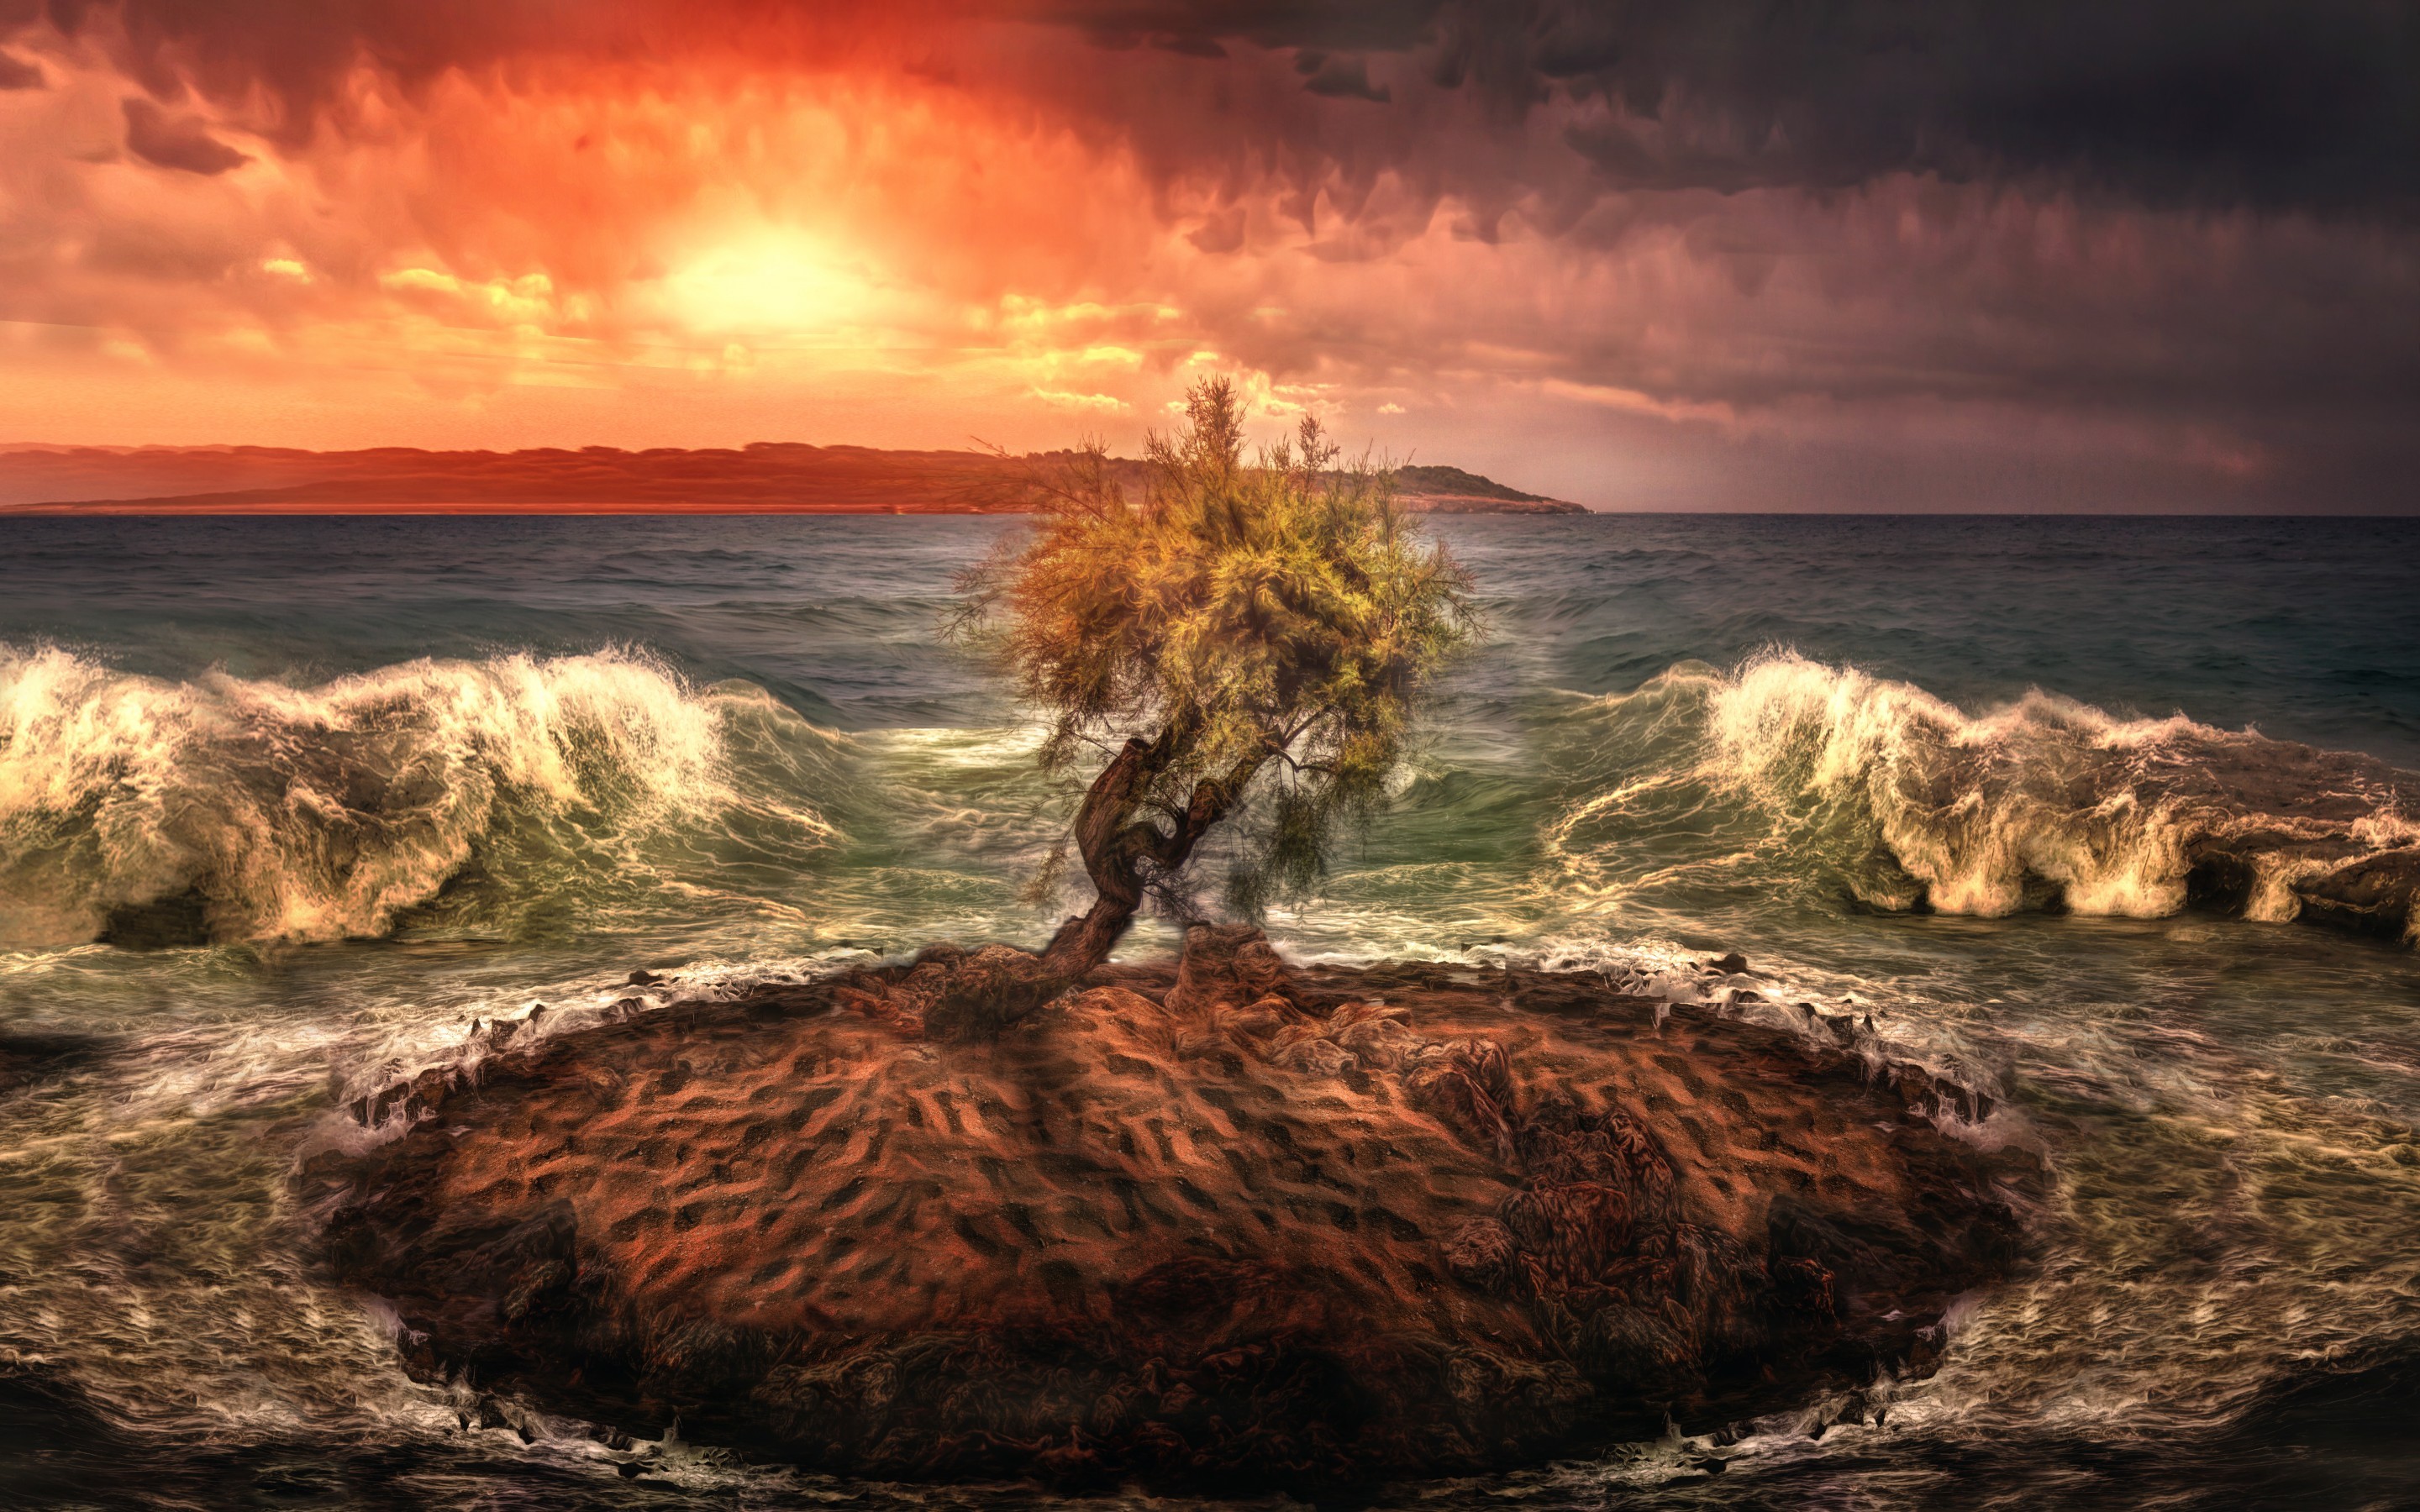 General 2880x1800 nature landscape sea waves coast photo manipulation HDR island trees clouds sunset cliff sand